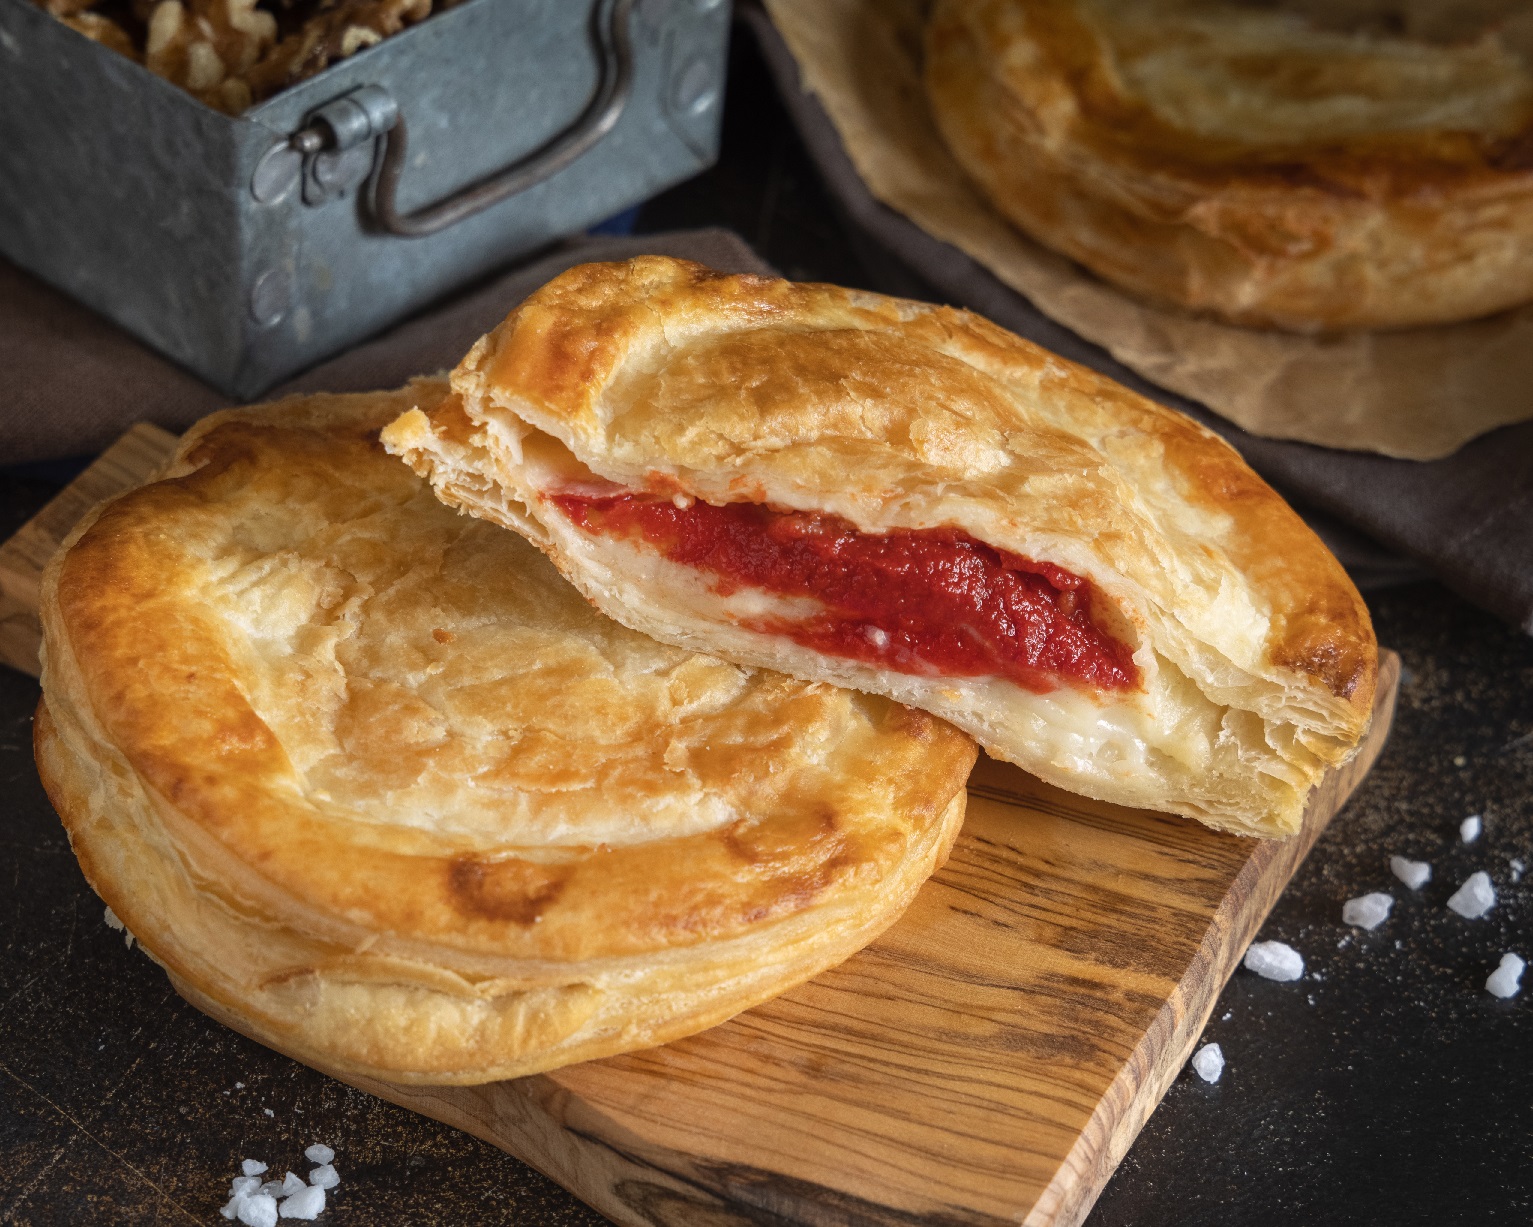 Rustico Puff Pastry From Lecce Filled With Stuffed With Tomato, Mozzarella And Bechamel Sauce